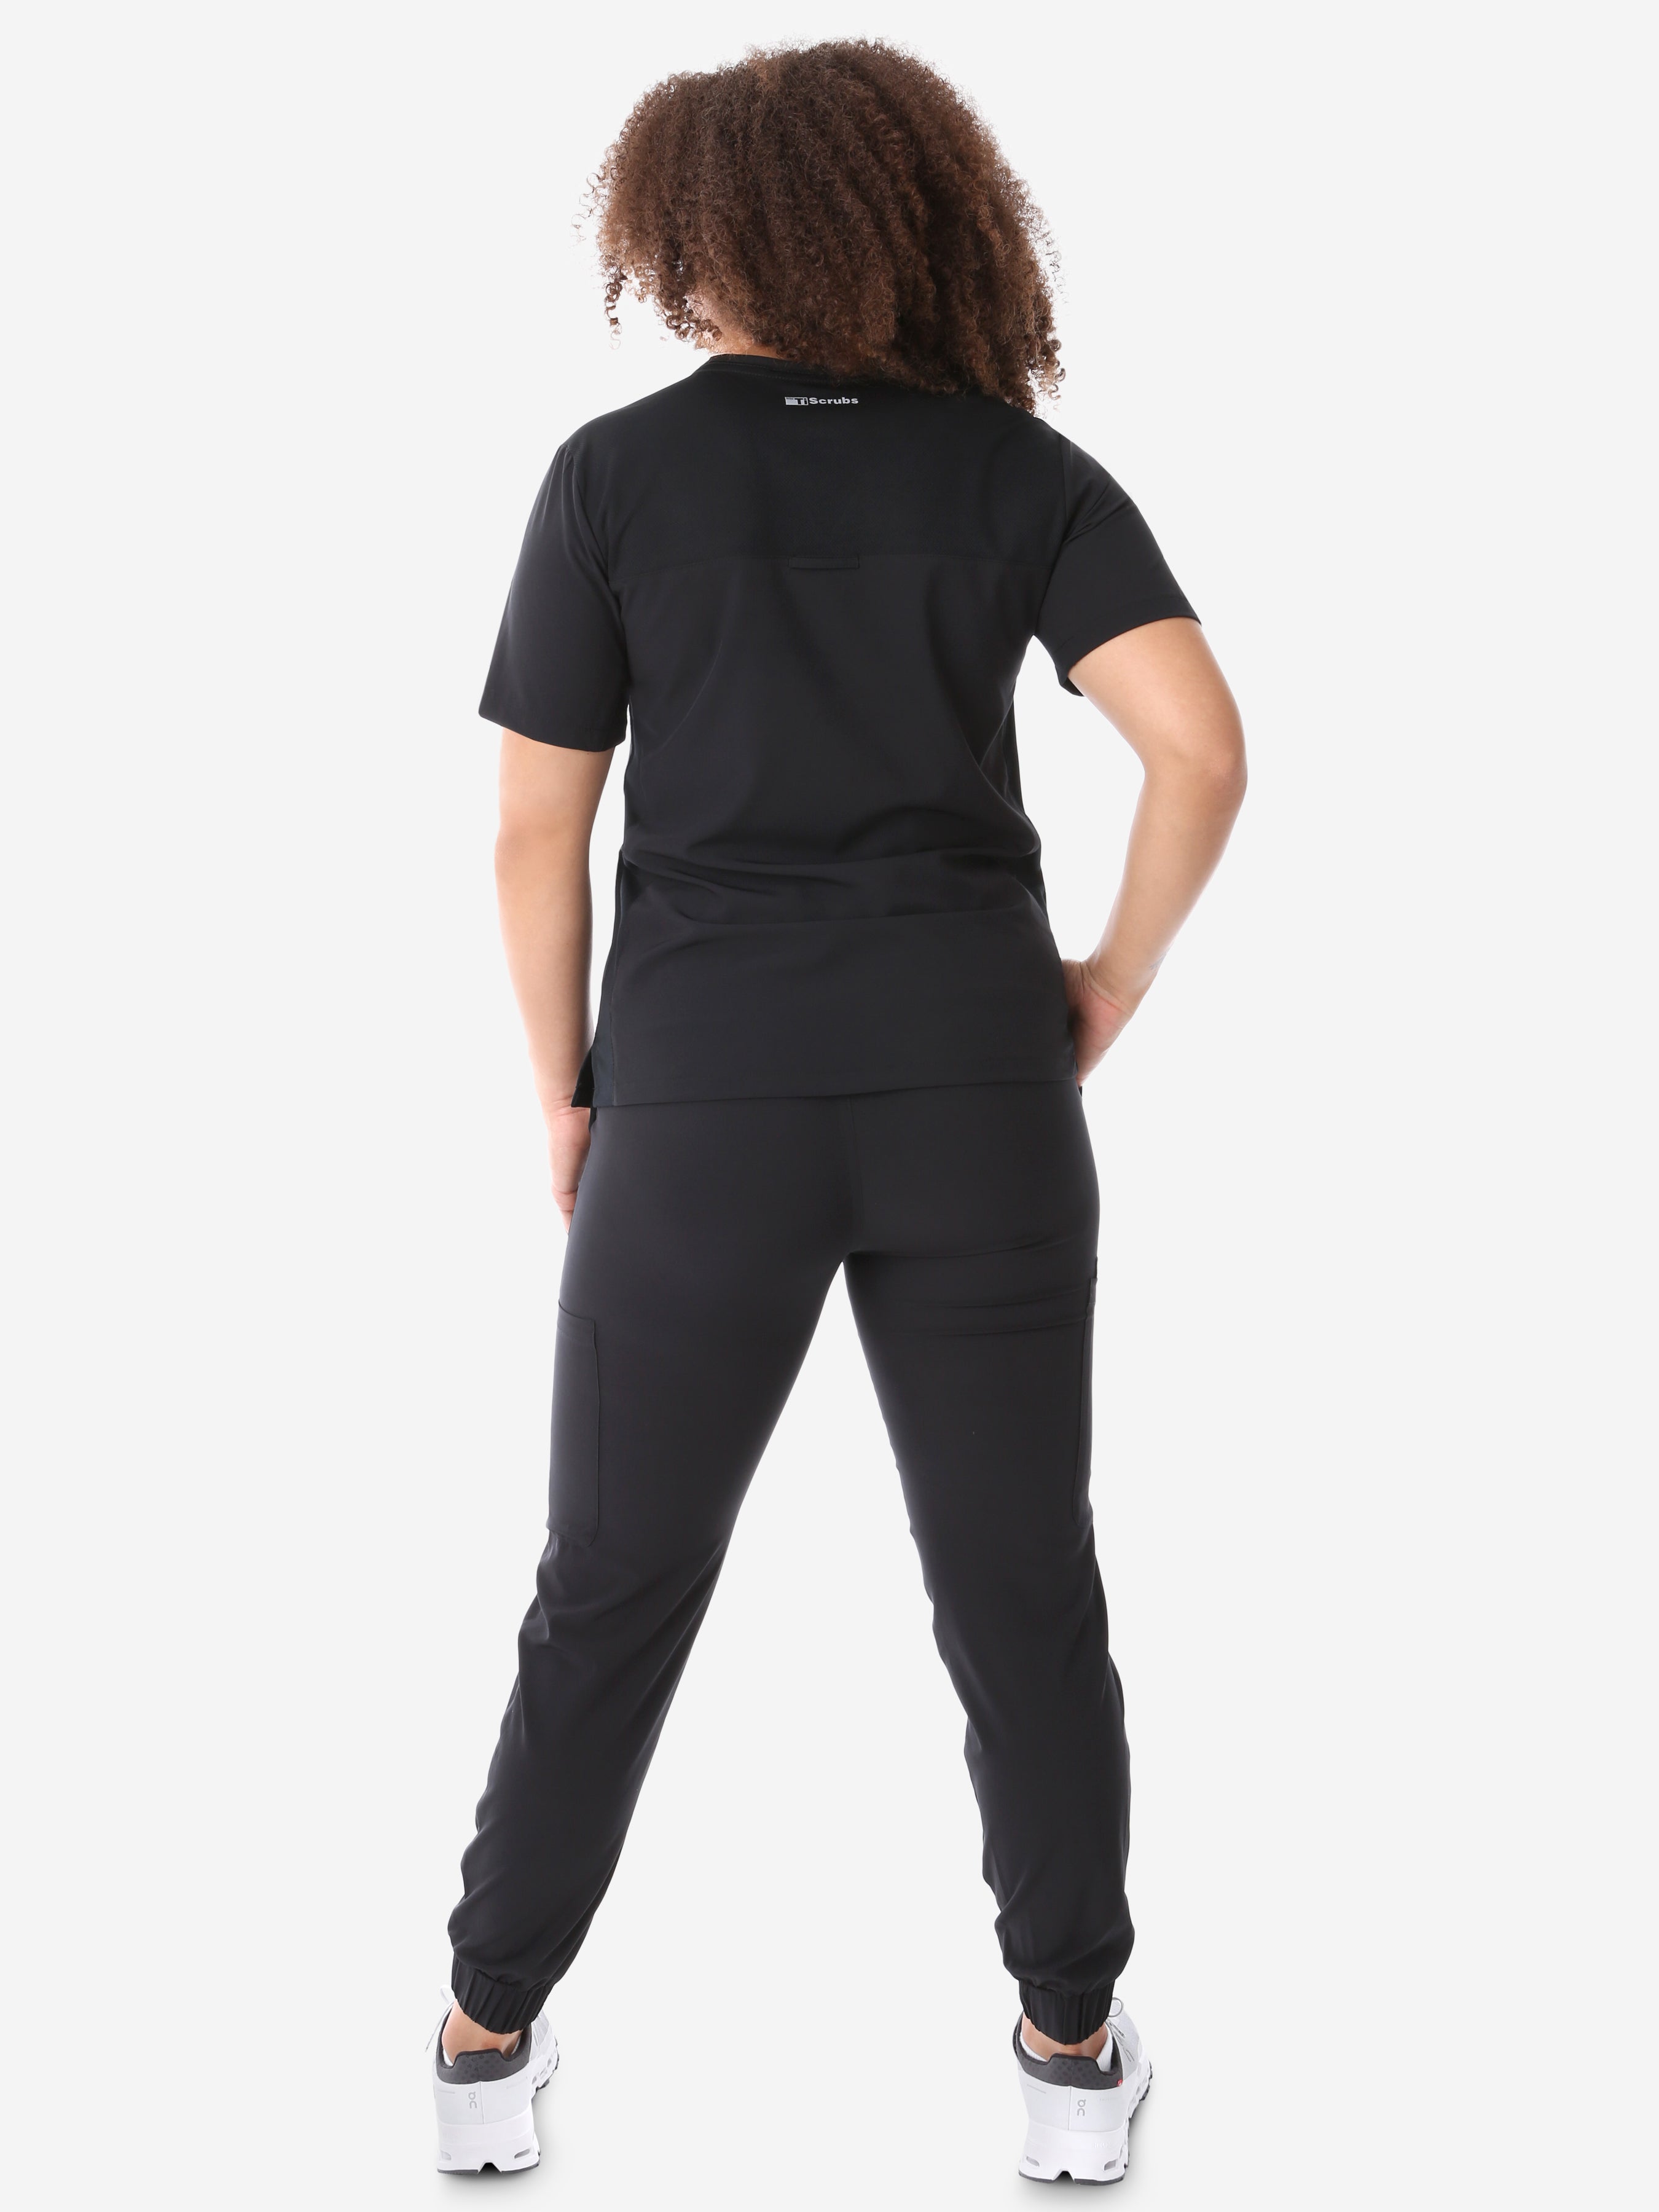 Women&#39;s Four-Pocket Scrub Top Real Black Top Full Body Back View with Joggers